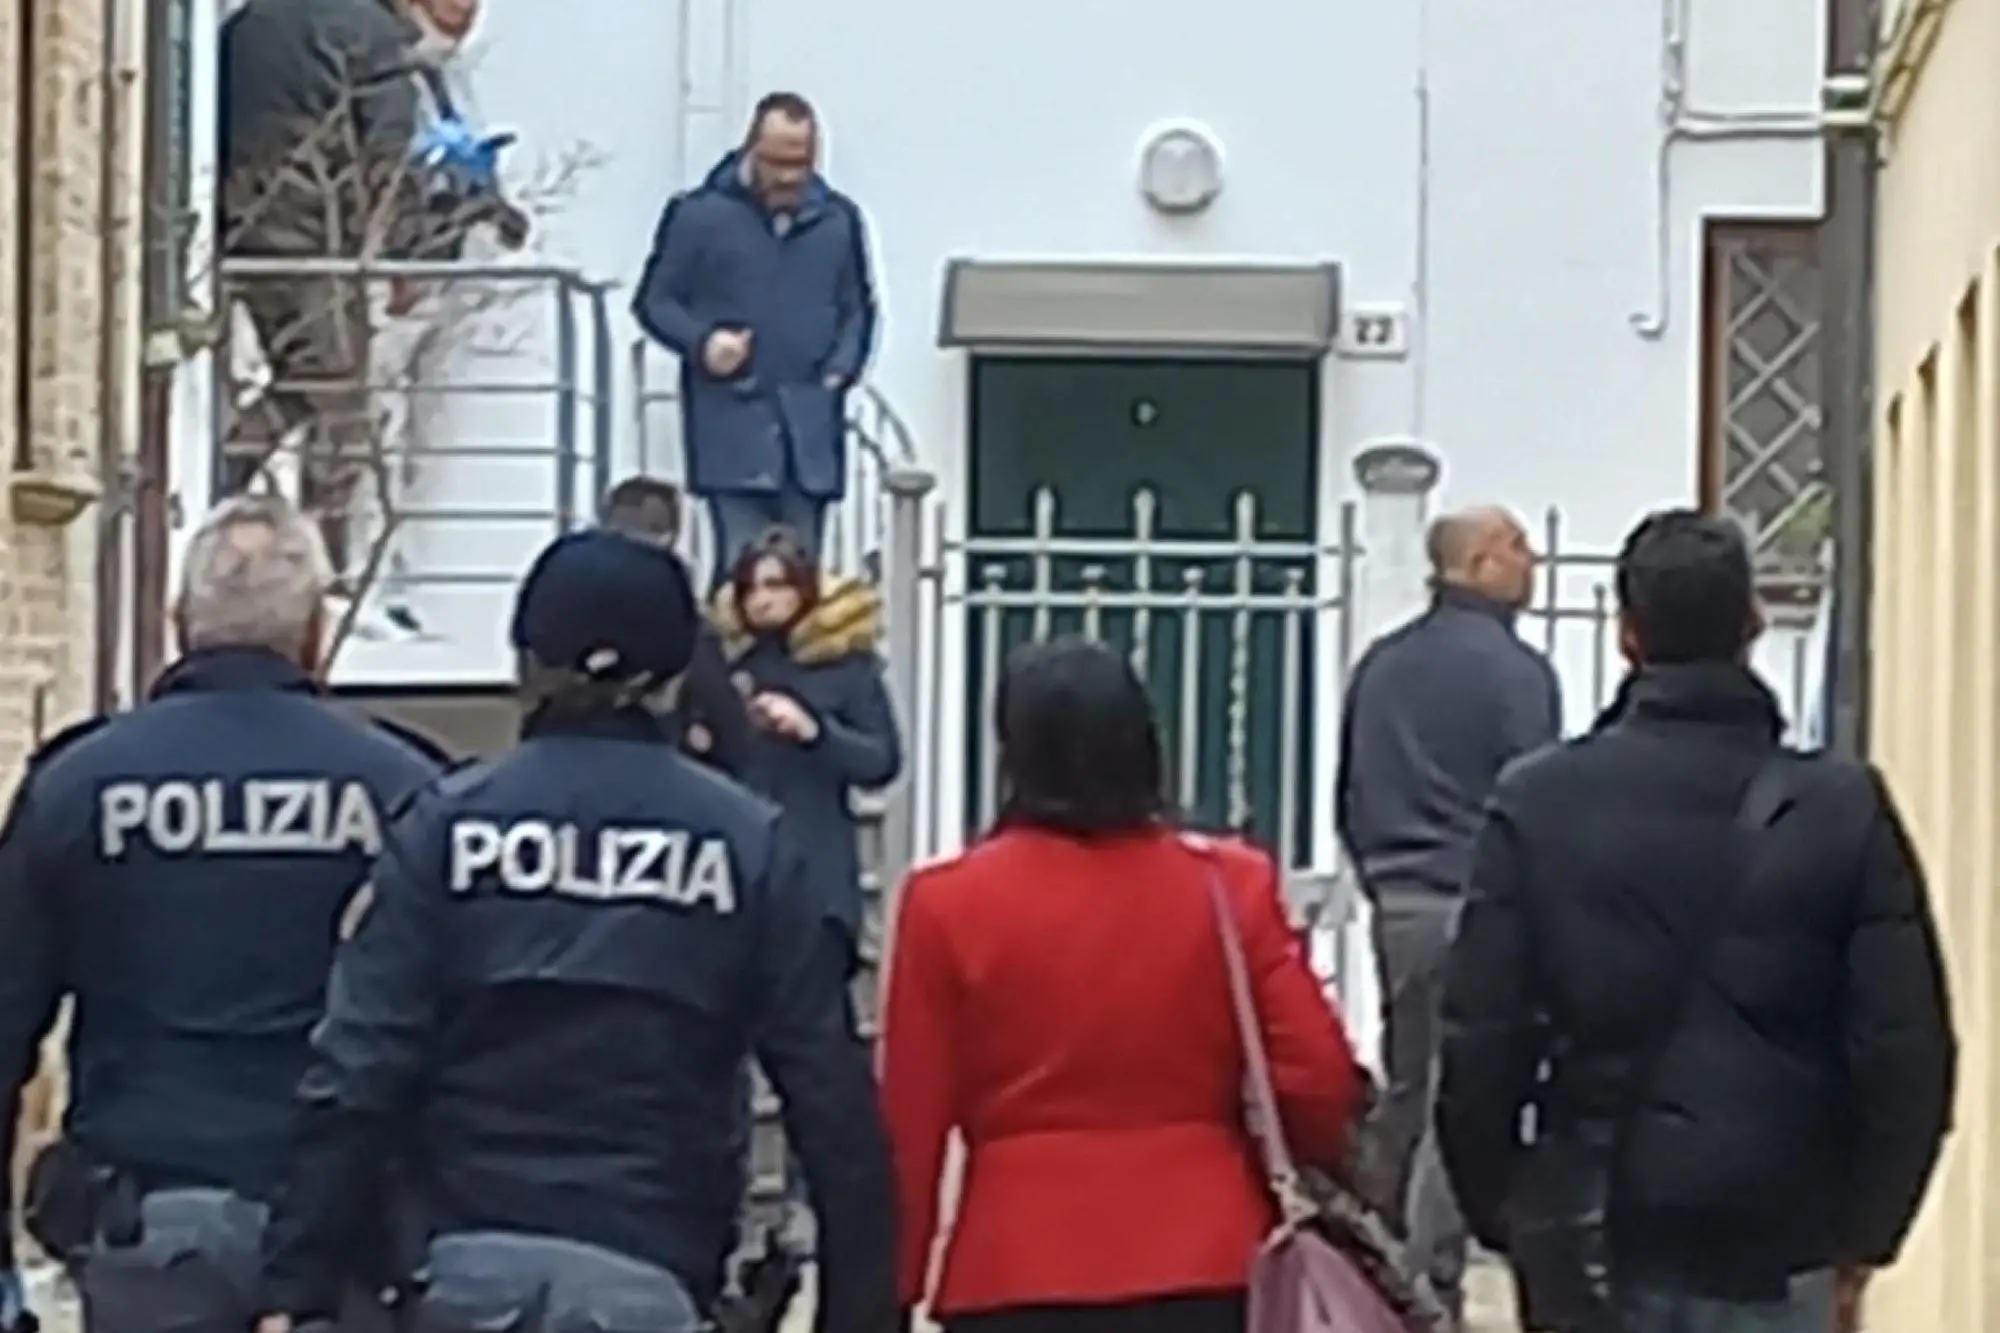 The police in front of the house where the murder took place (Ansa)